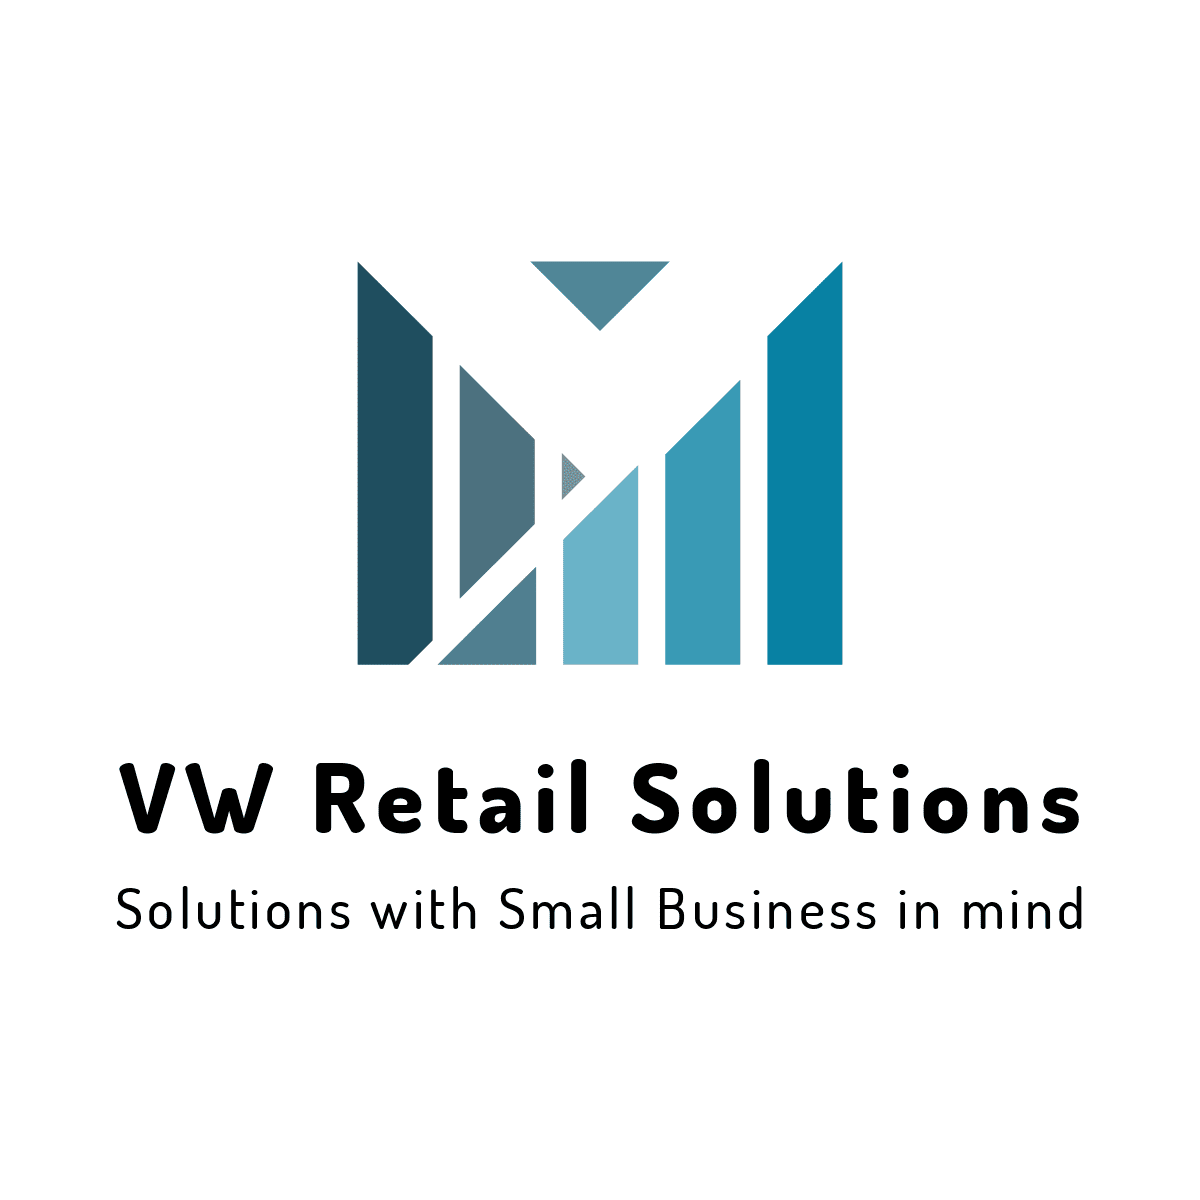 VW Retail Solutions